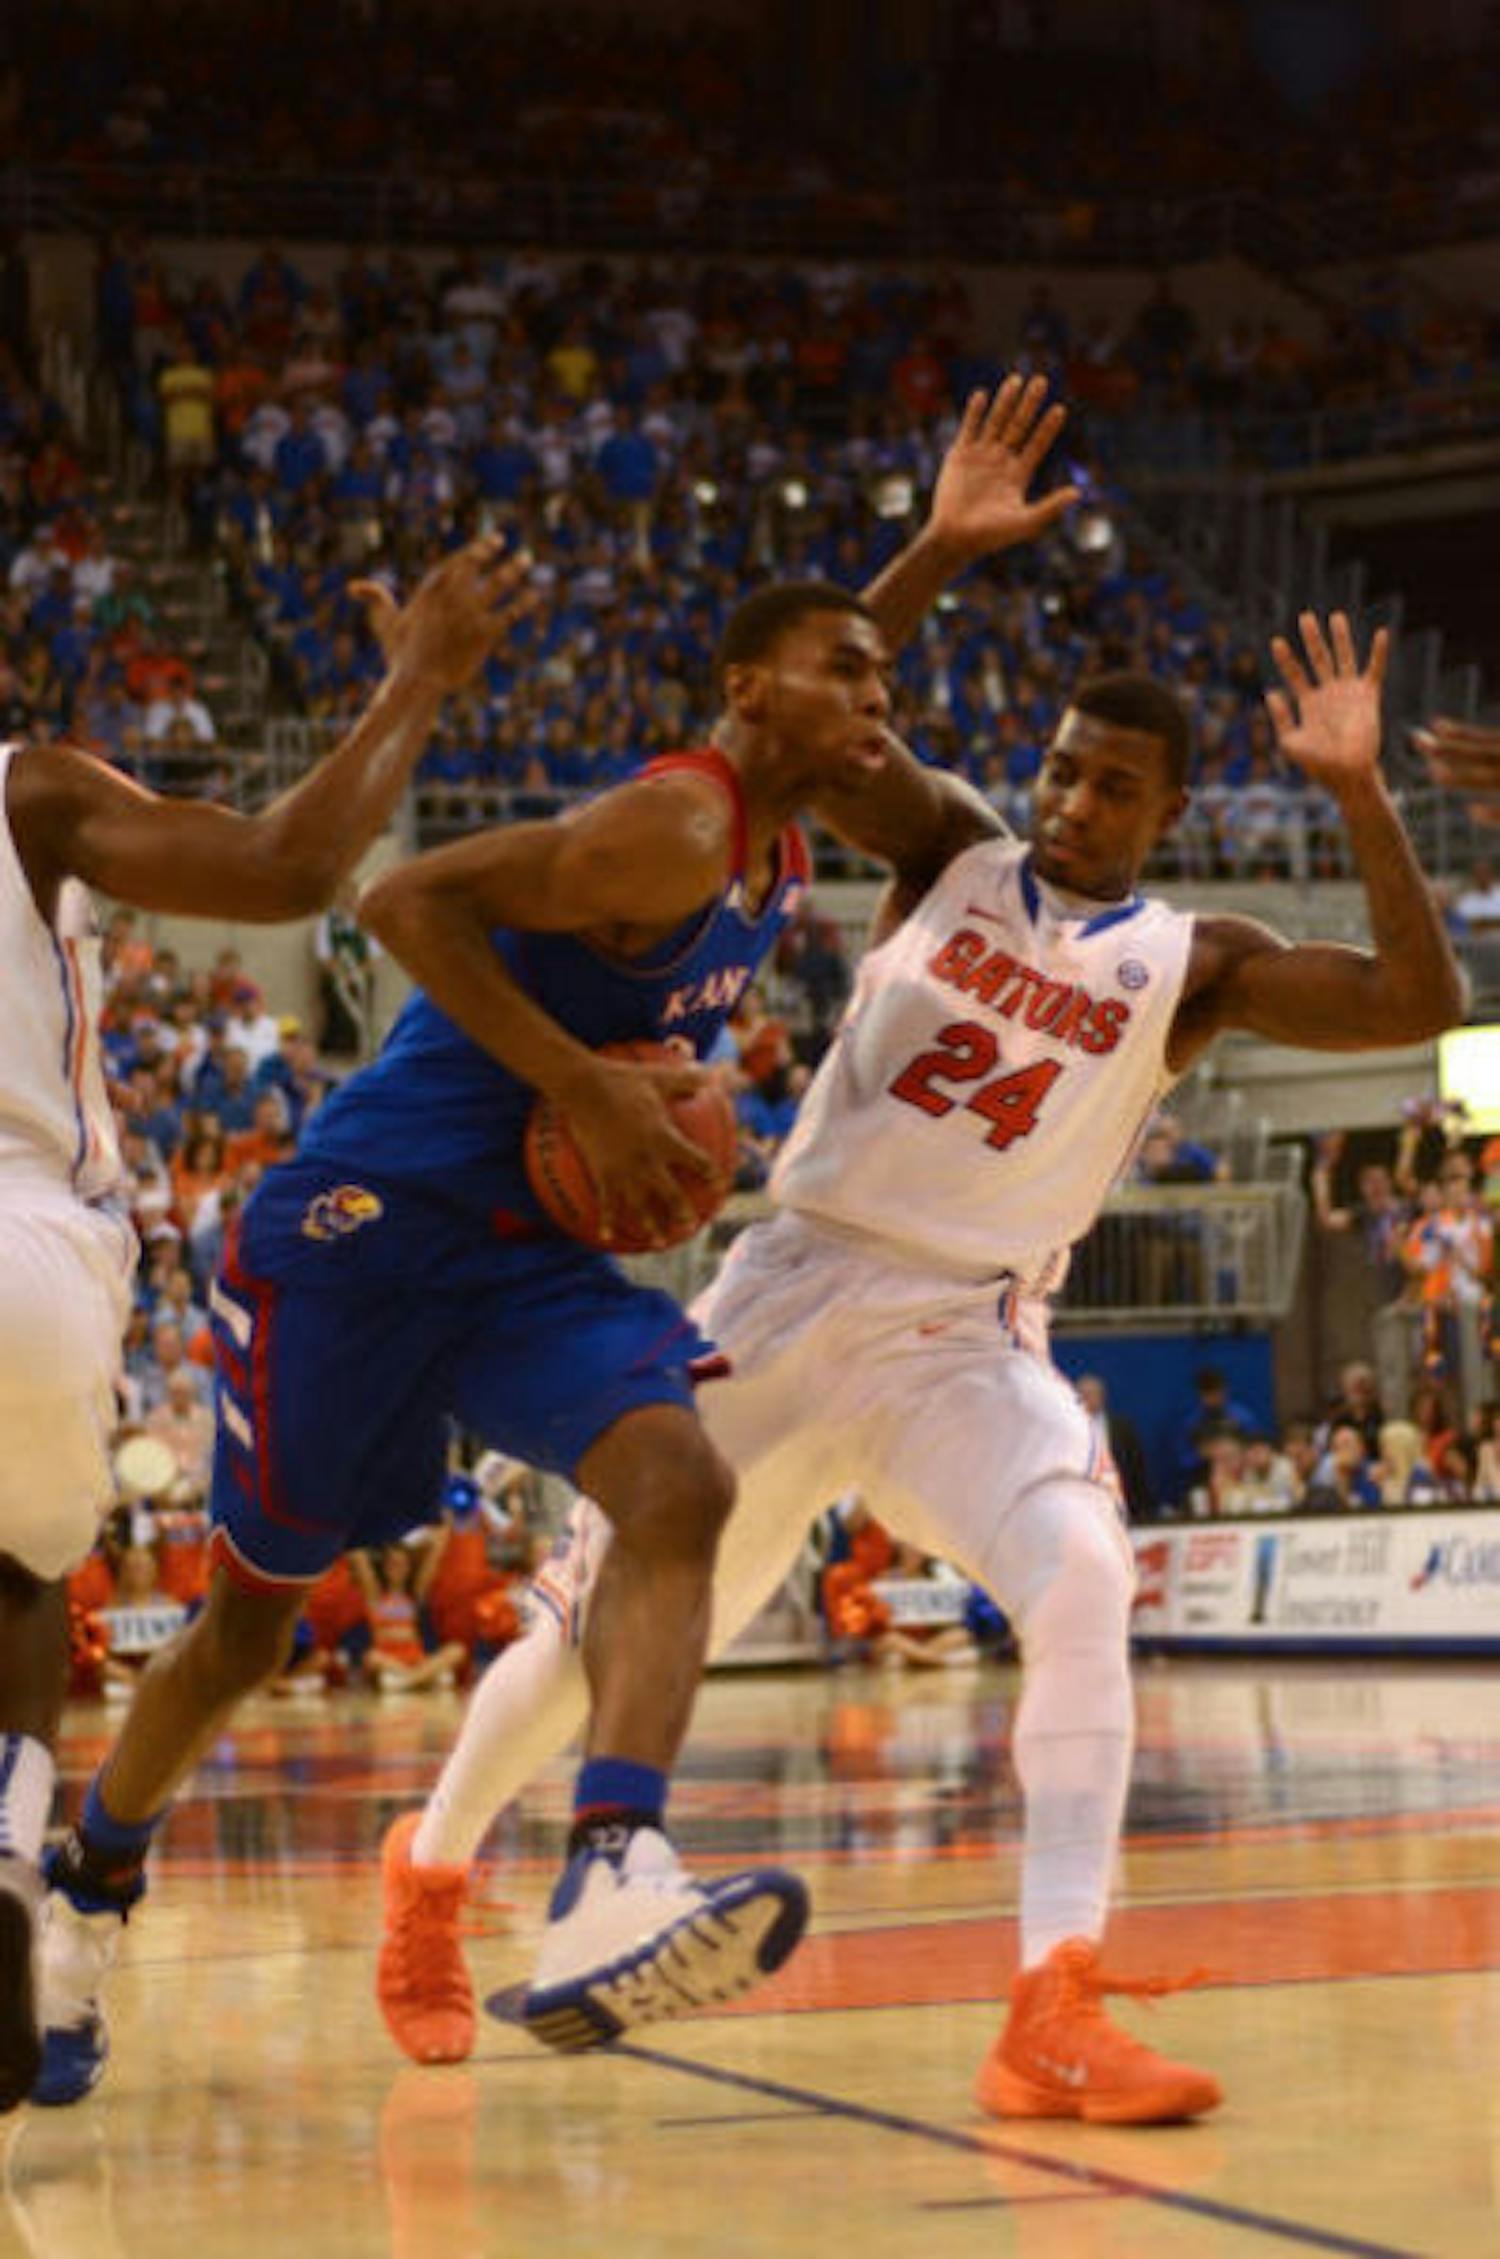 UK guard Andrew Wiggins drives past UF forward Casey Prather (24) during No. 19 Florida's 67-61 win against No. 13 Kansas on Tuesday night in the O'Connell Center.